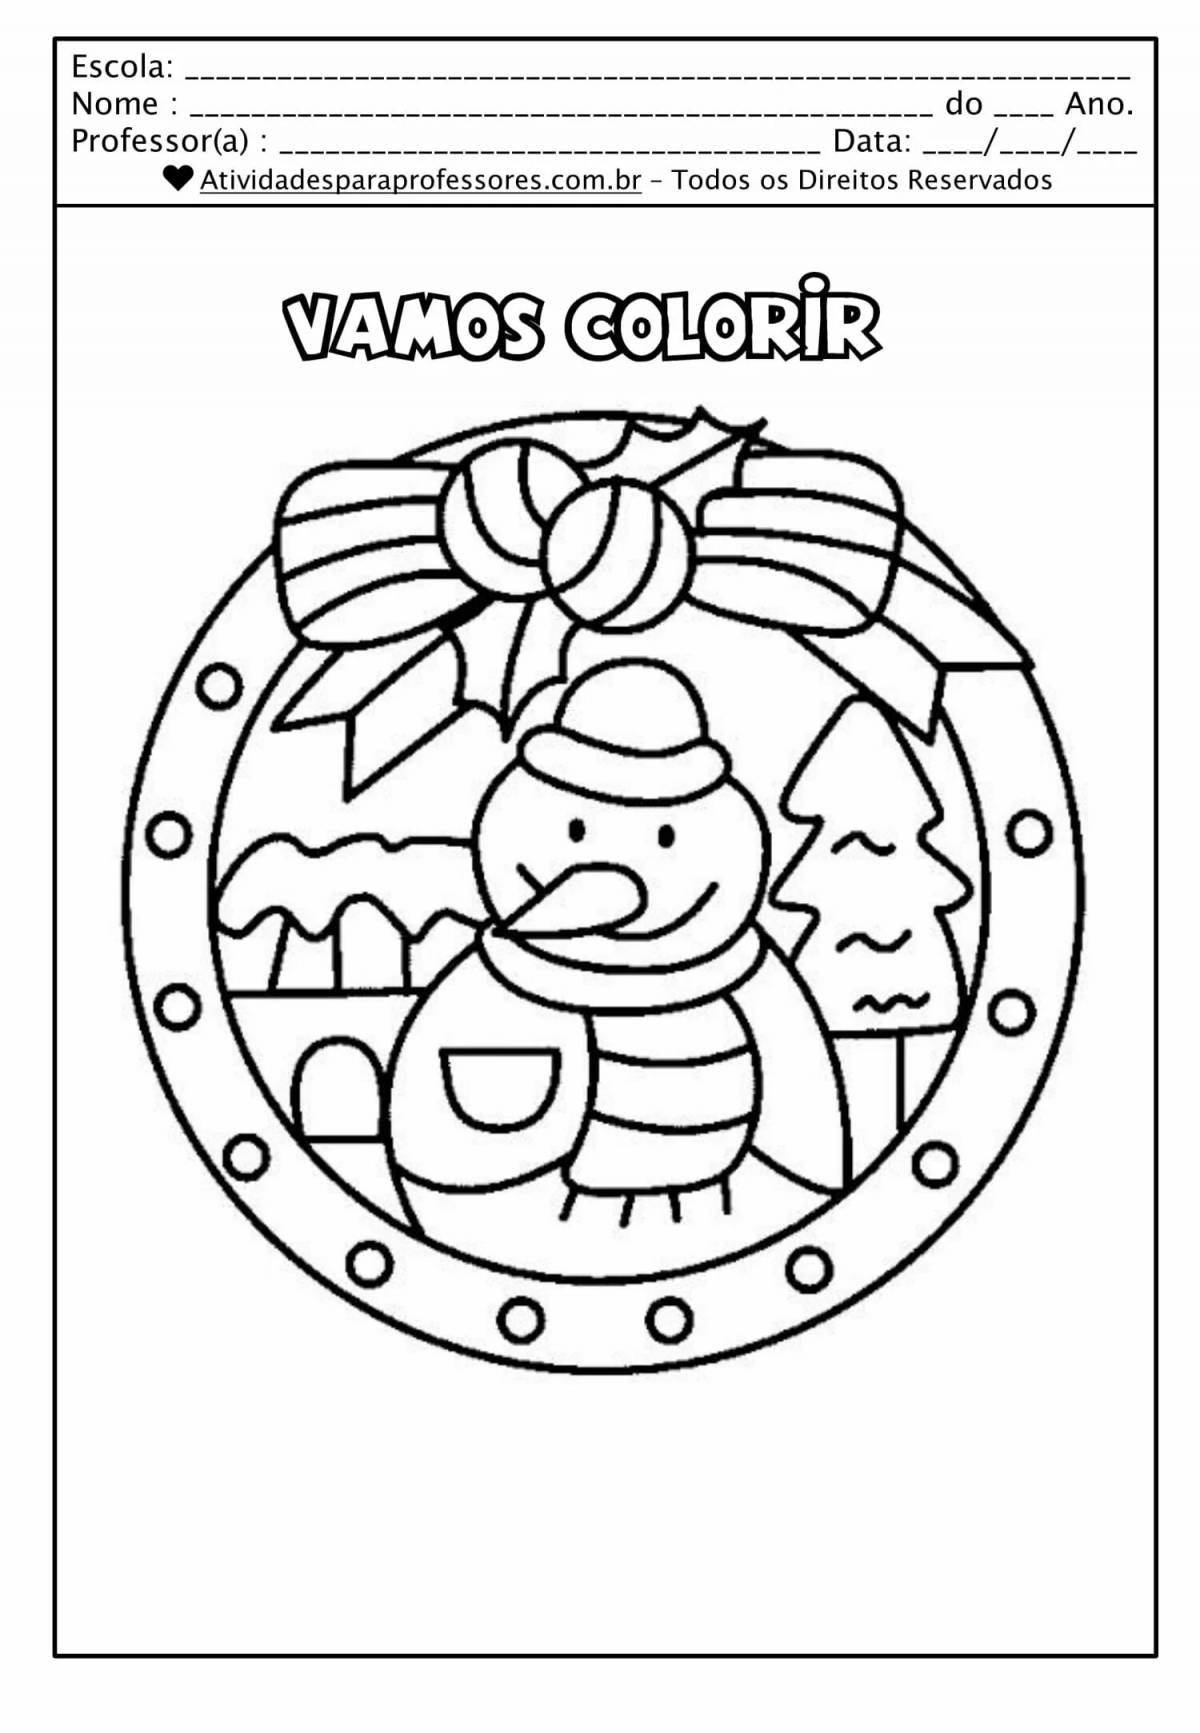 Coloring Christmas crafts